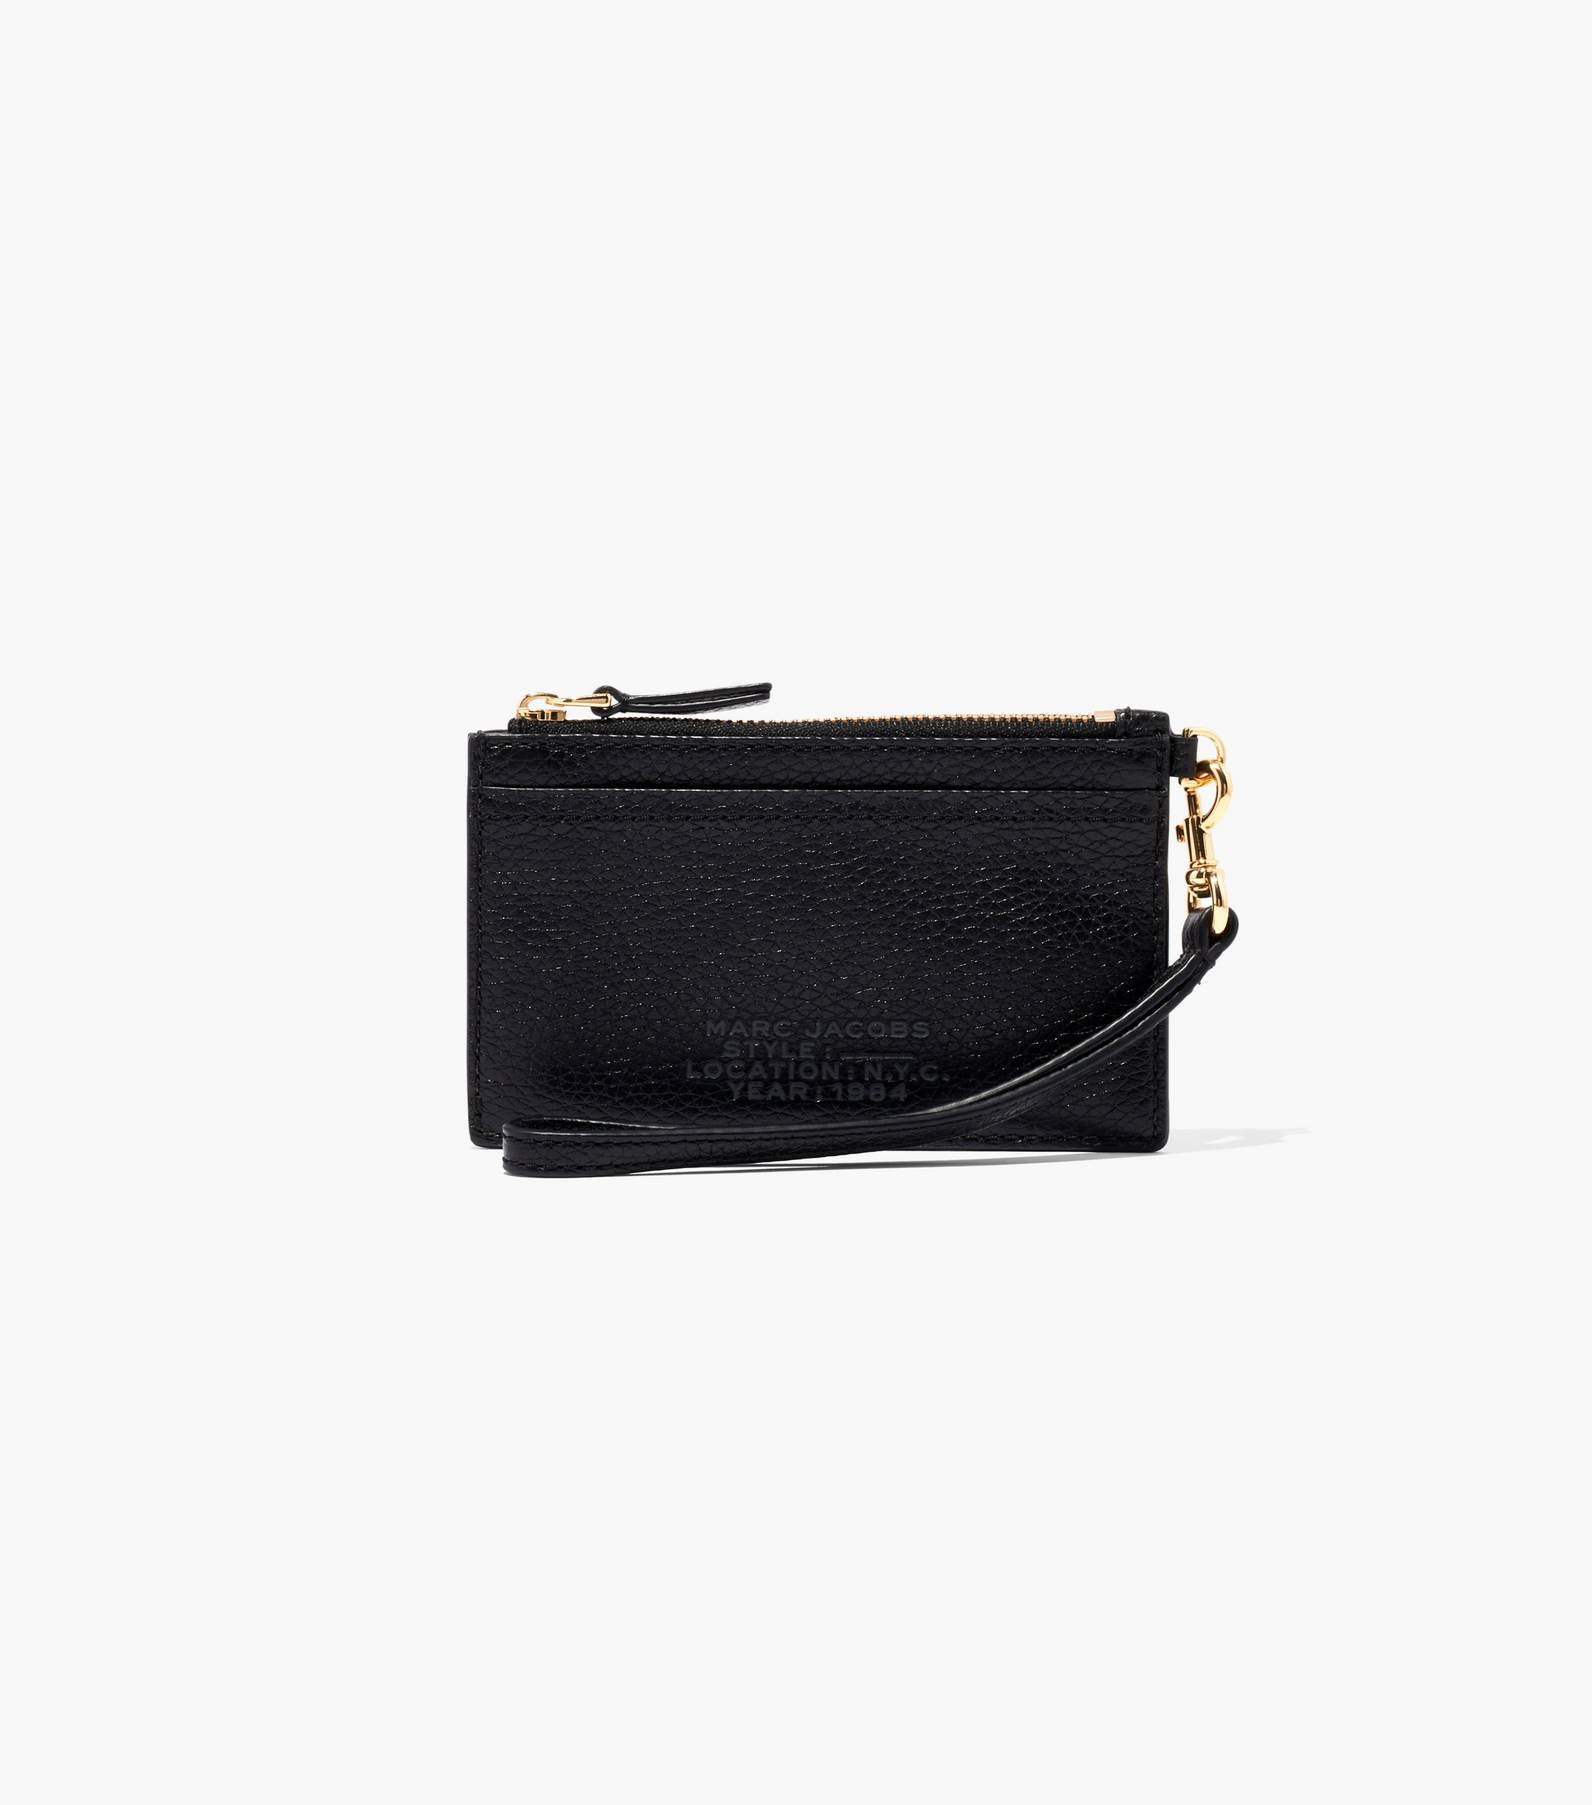 The Leather Top Zip Wristlet